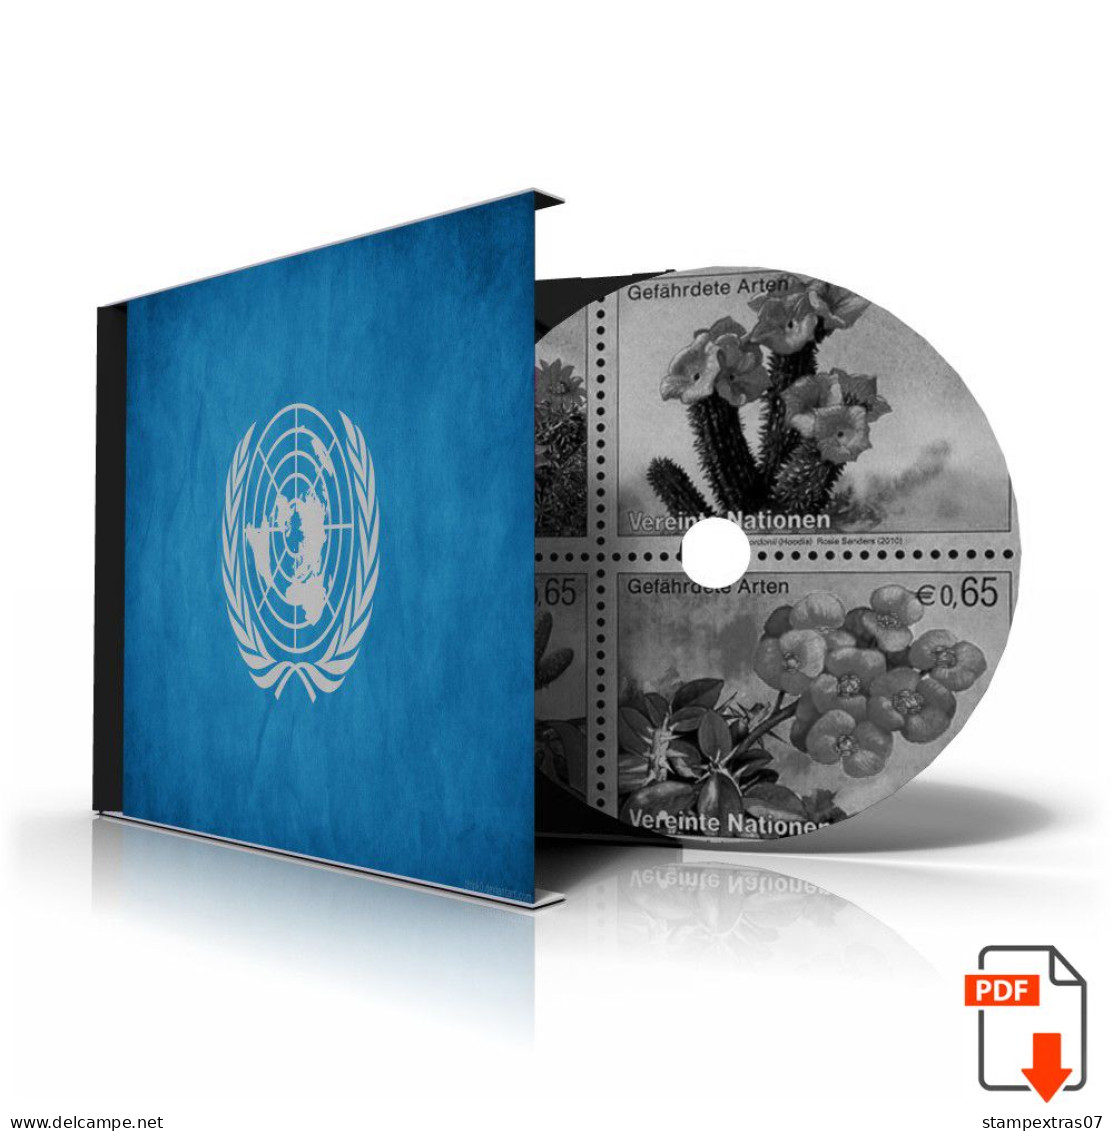 UNITED NATIONS - VIENNA 1979-2020 STAMP ALBUM PAGES (165 B&w Illustrated Pages) - Anglais